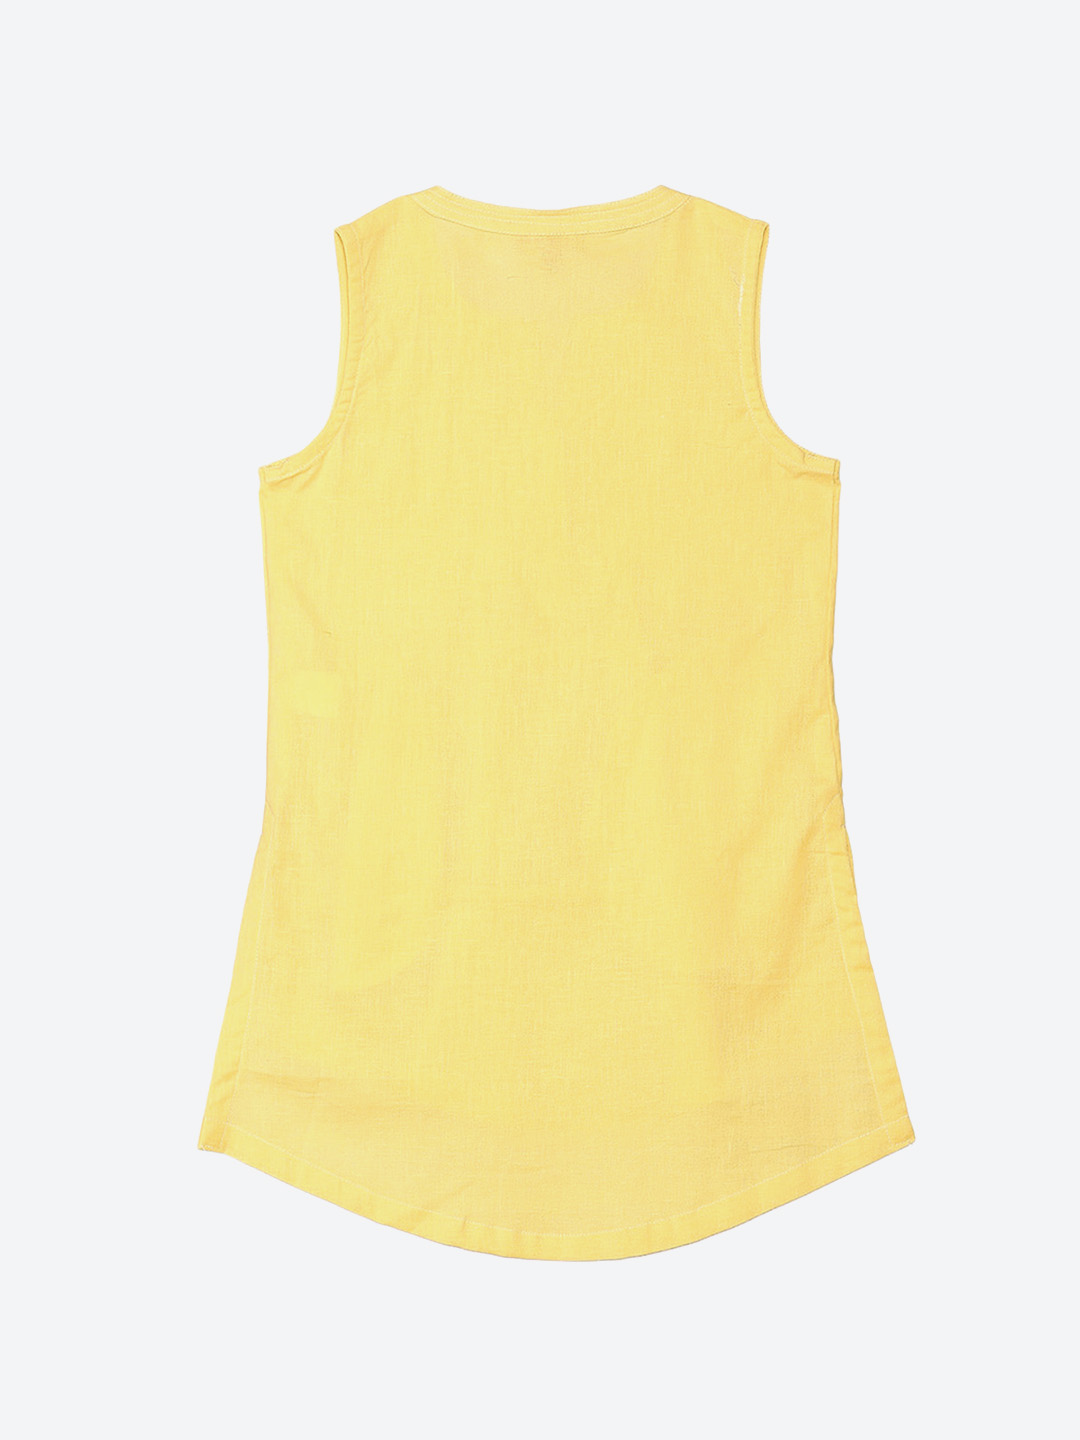 Yellow Cotton Flax Top